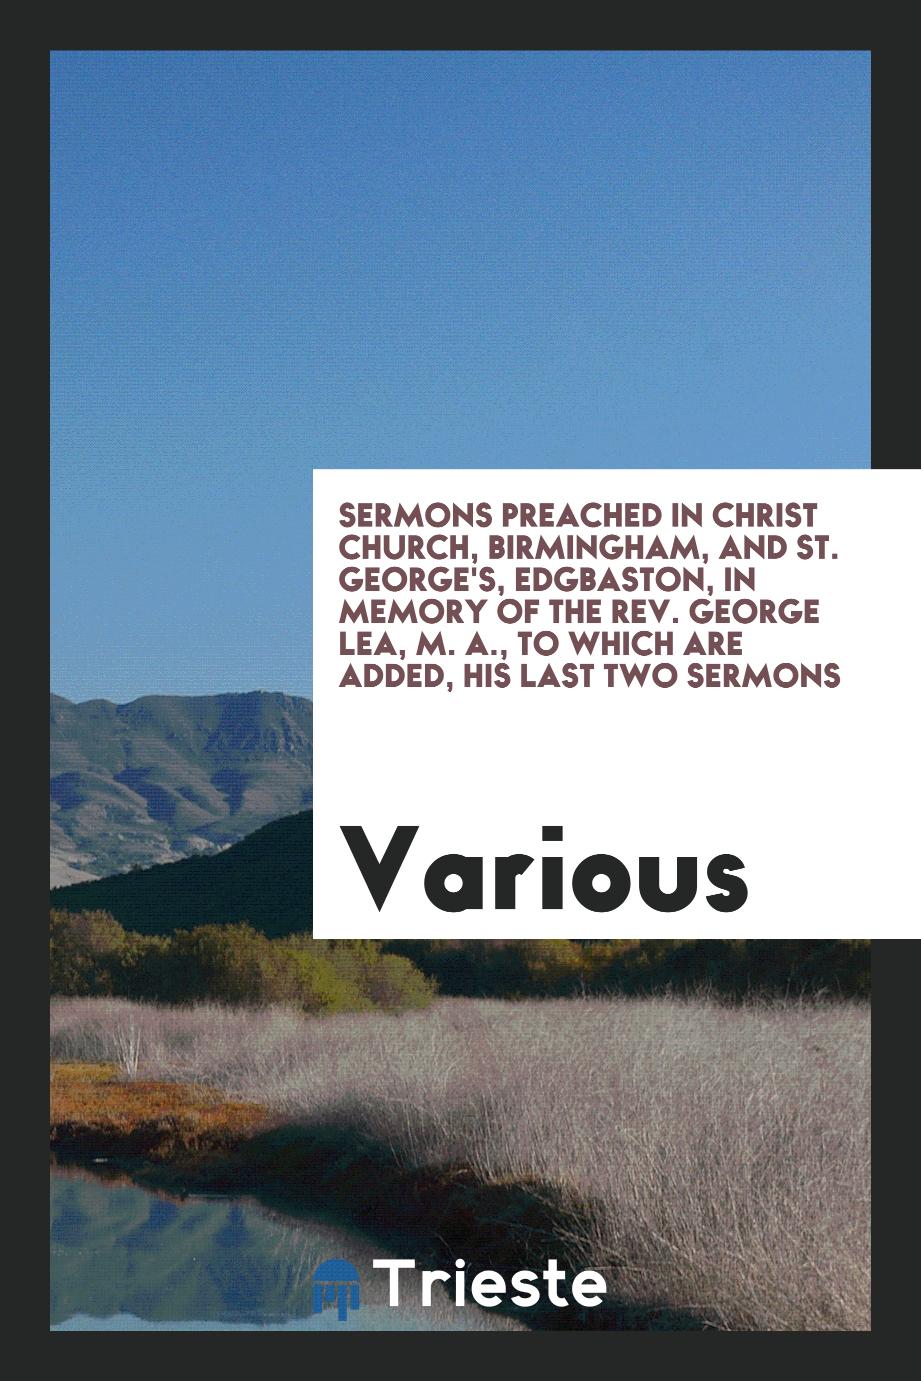 Sermons Preached in Christ Church, Birmingham, and St. George's, Edgbaston, in Memory of the Rev. George Lea, M. A., to Which Are Added, His Last Two Sermons